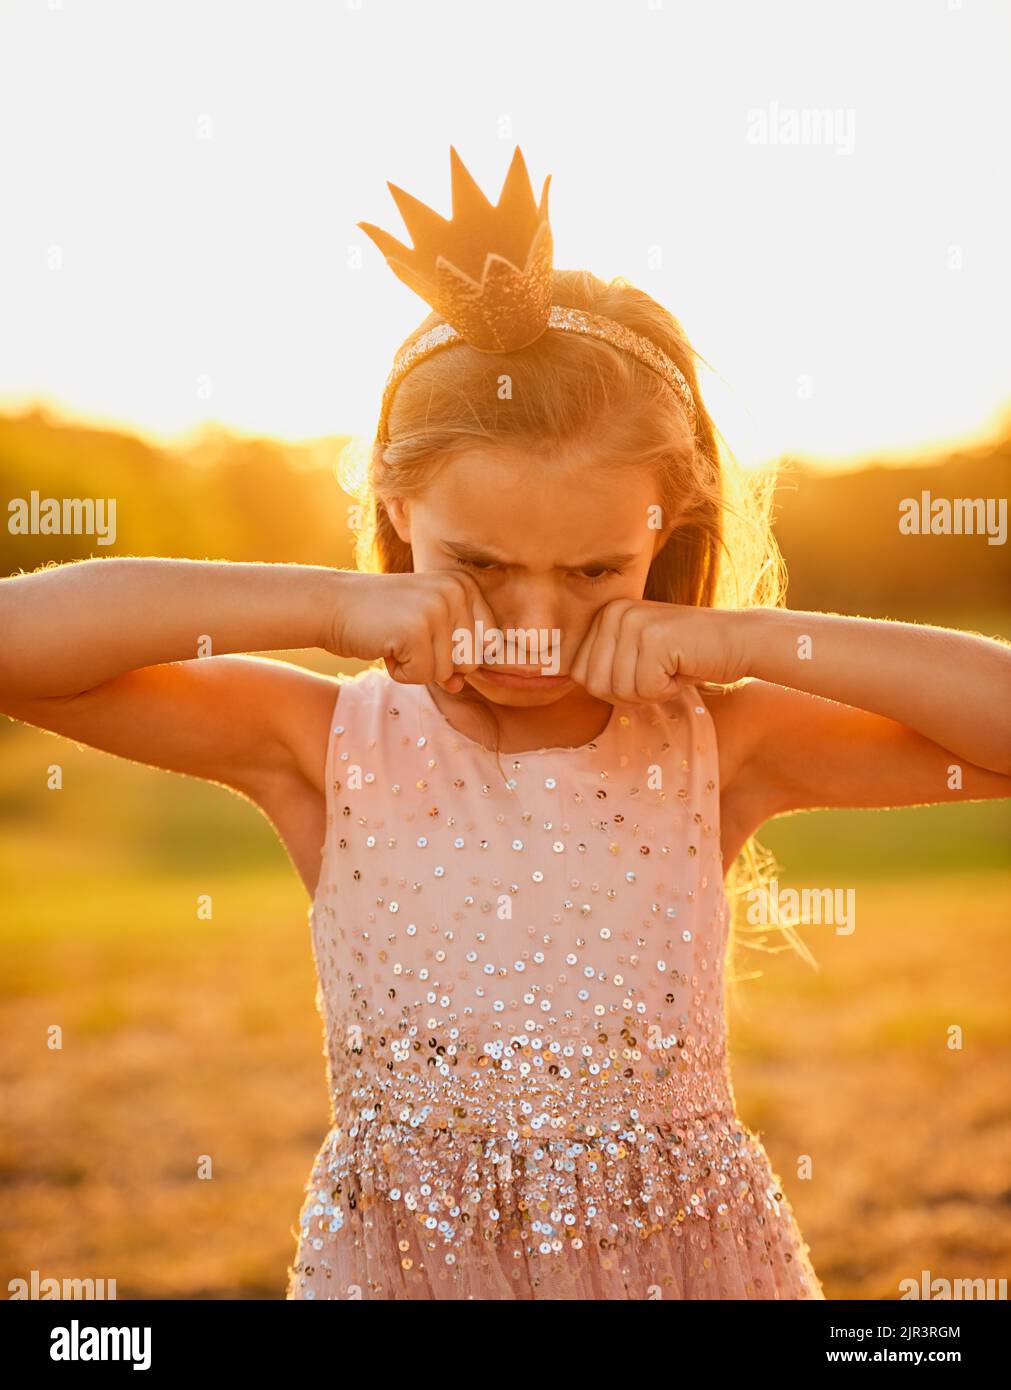 No, playtime cant be over yet. an adorable little girl playing outdoors. Stock Photo